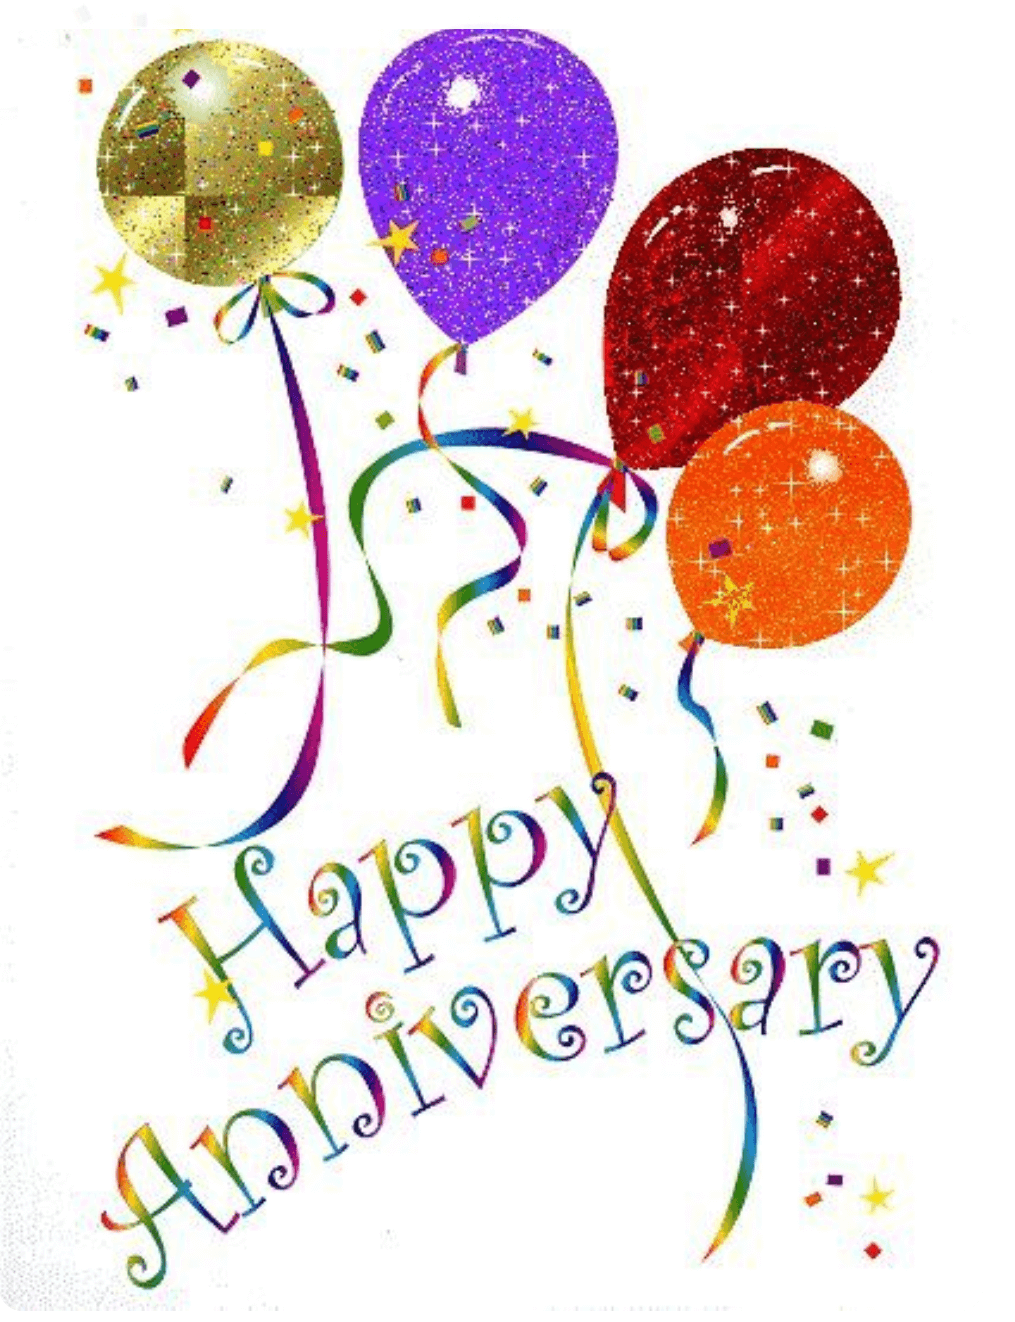 Happy Marriage Anniversary Clipart Wishes. Best Wishes. Happy marriage anniversary, Happy anniversary wishes, Happy anniversary cards